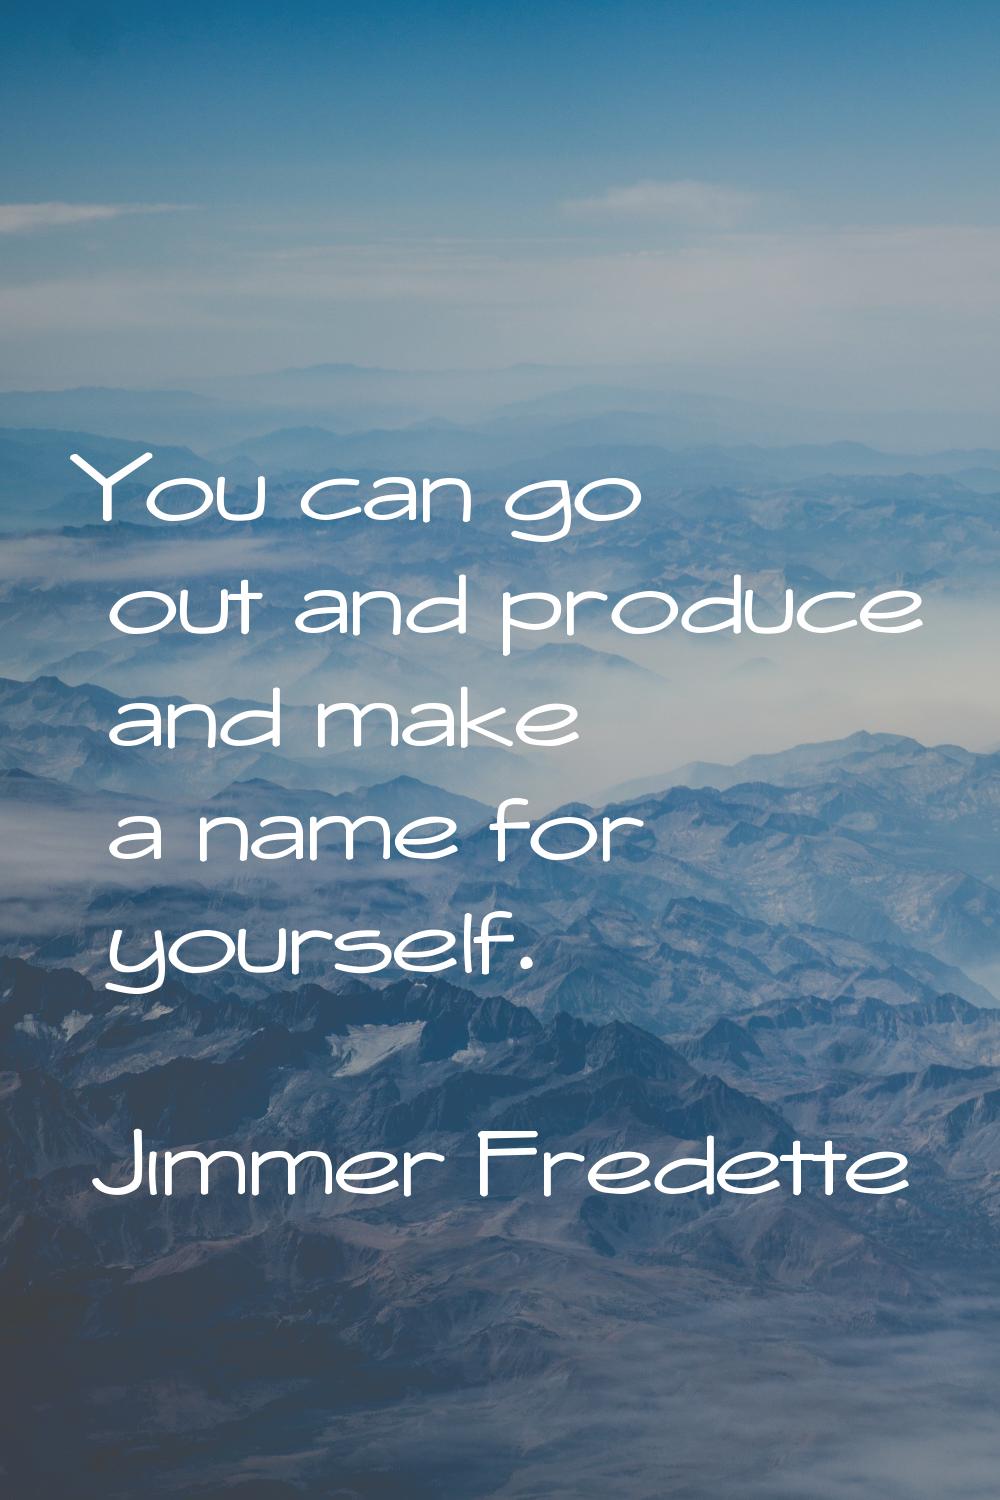 You can go out and produce and make a name for yourself.